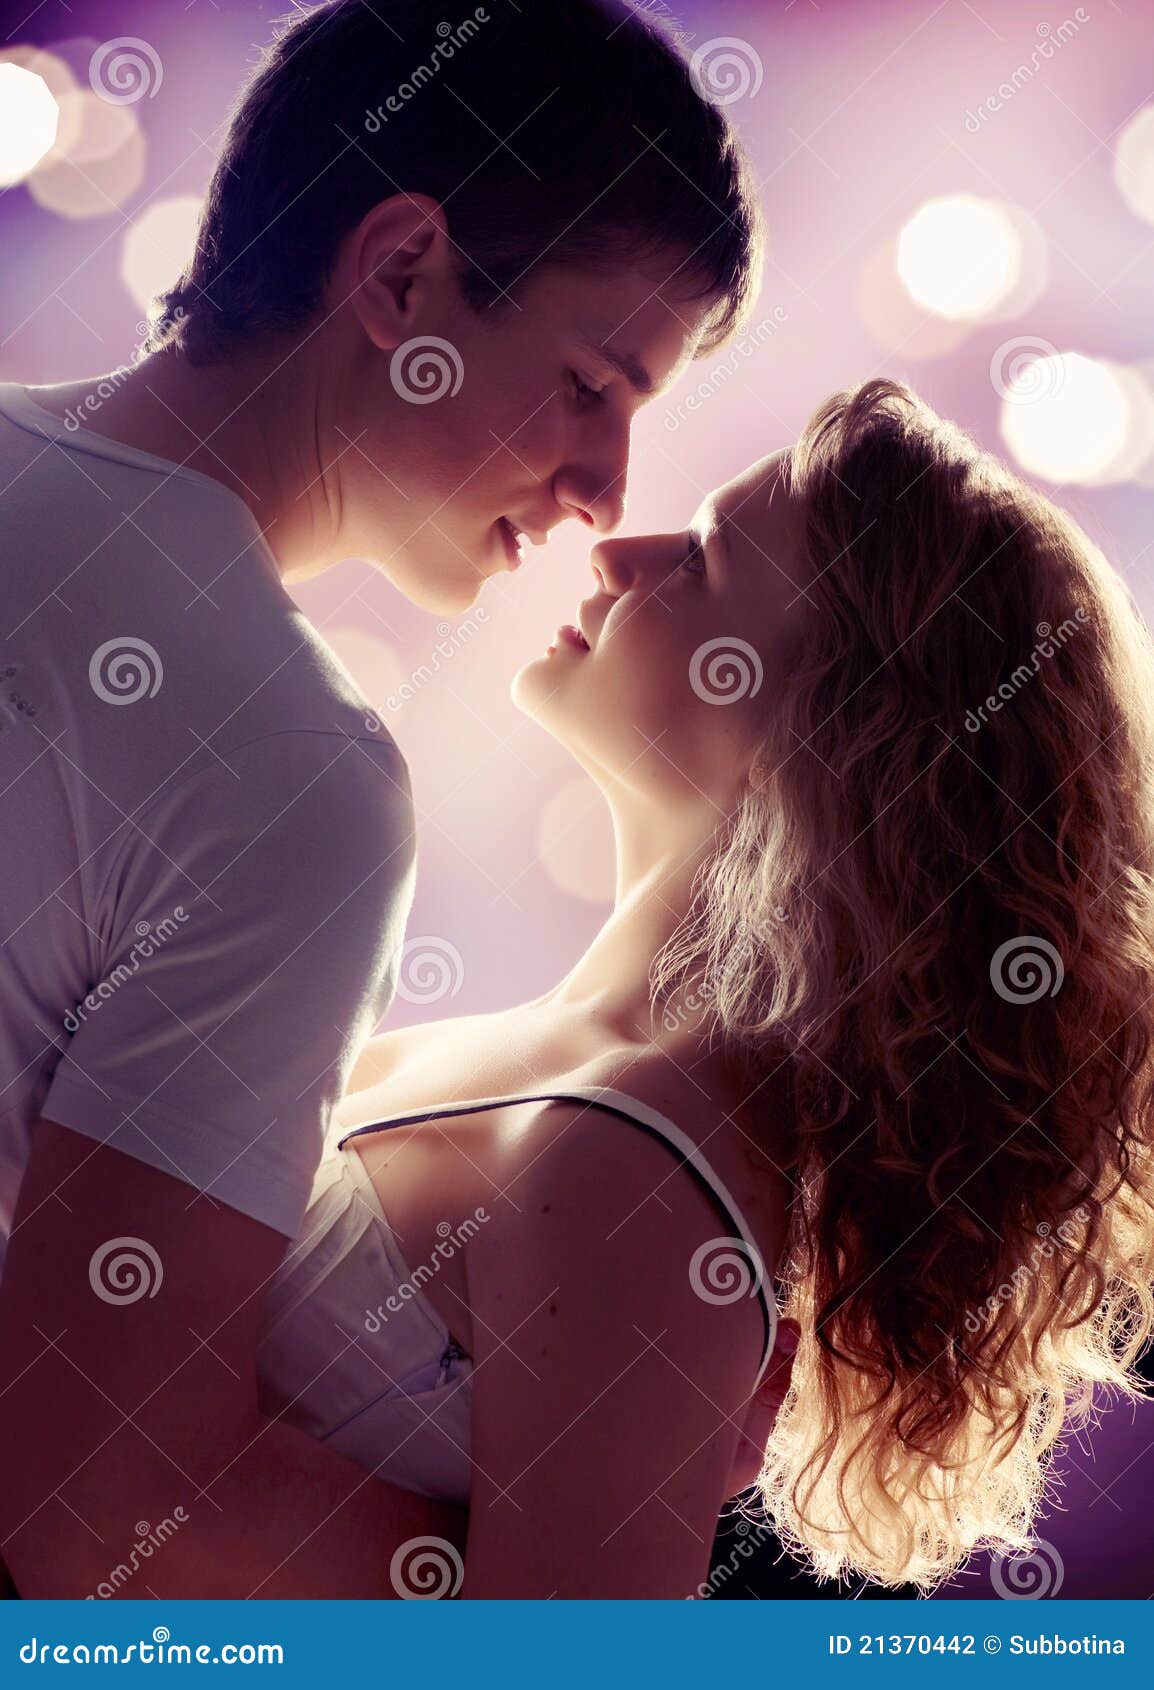 Young Couple in love stock photo. Image of kisses, dance - 21370442